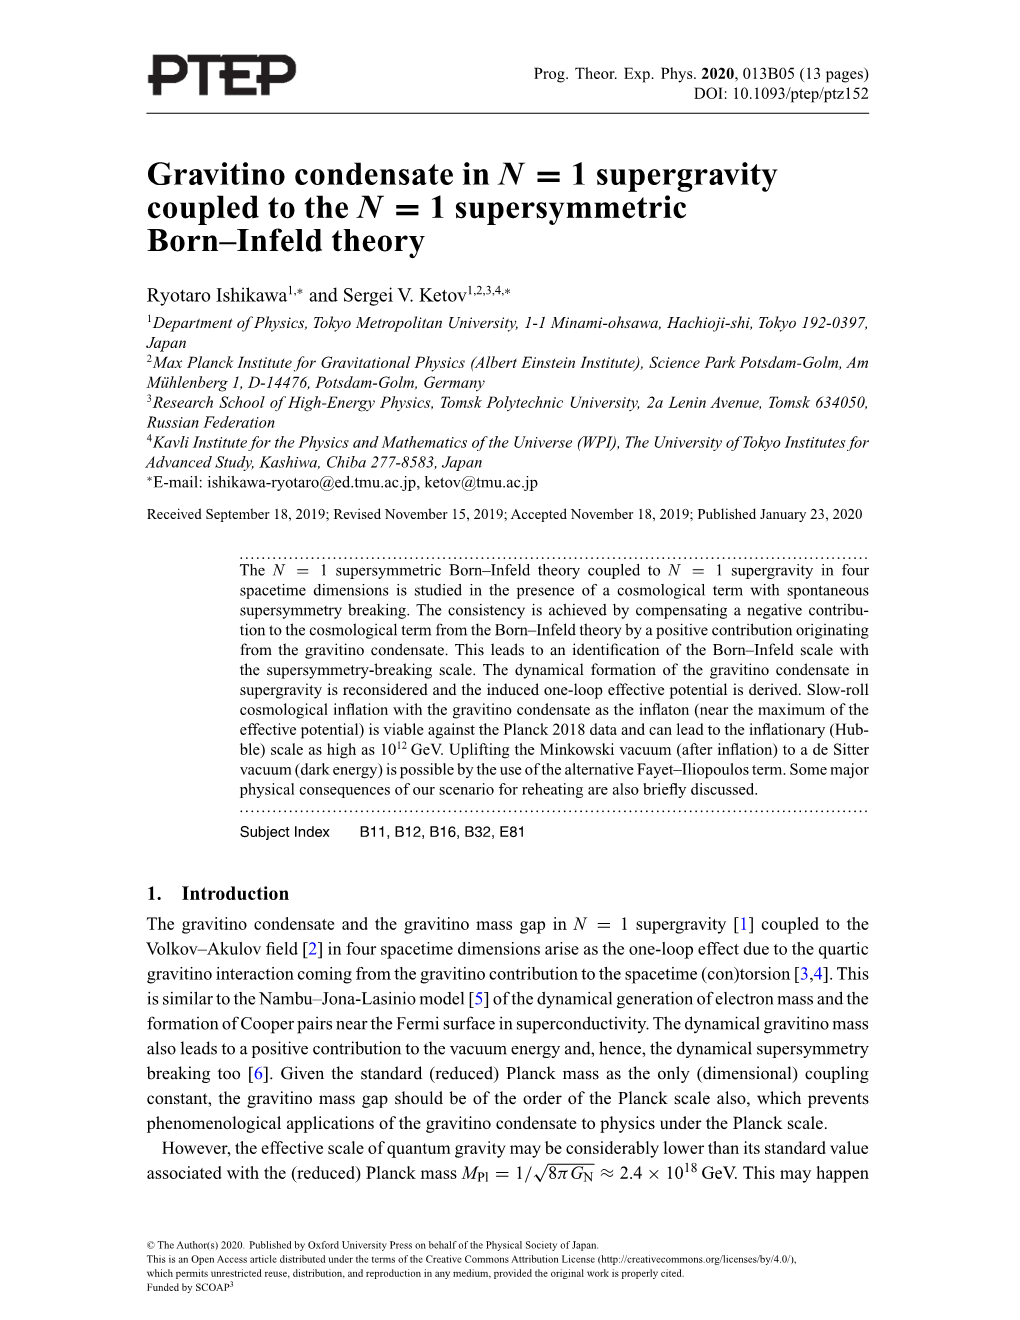 Gravitino Condensate in N = 1 Supergravity Coupled to the N = 1 Supersymmetric Born–Infeld Theory